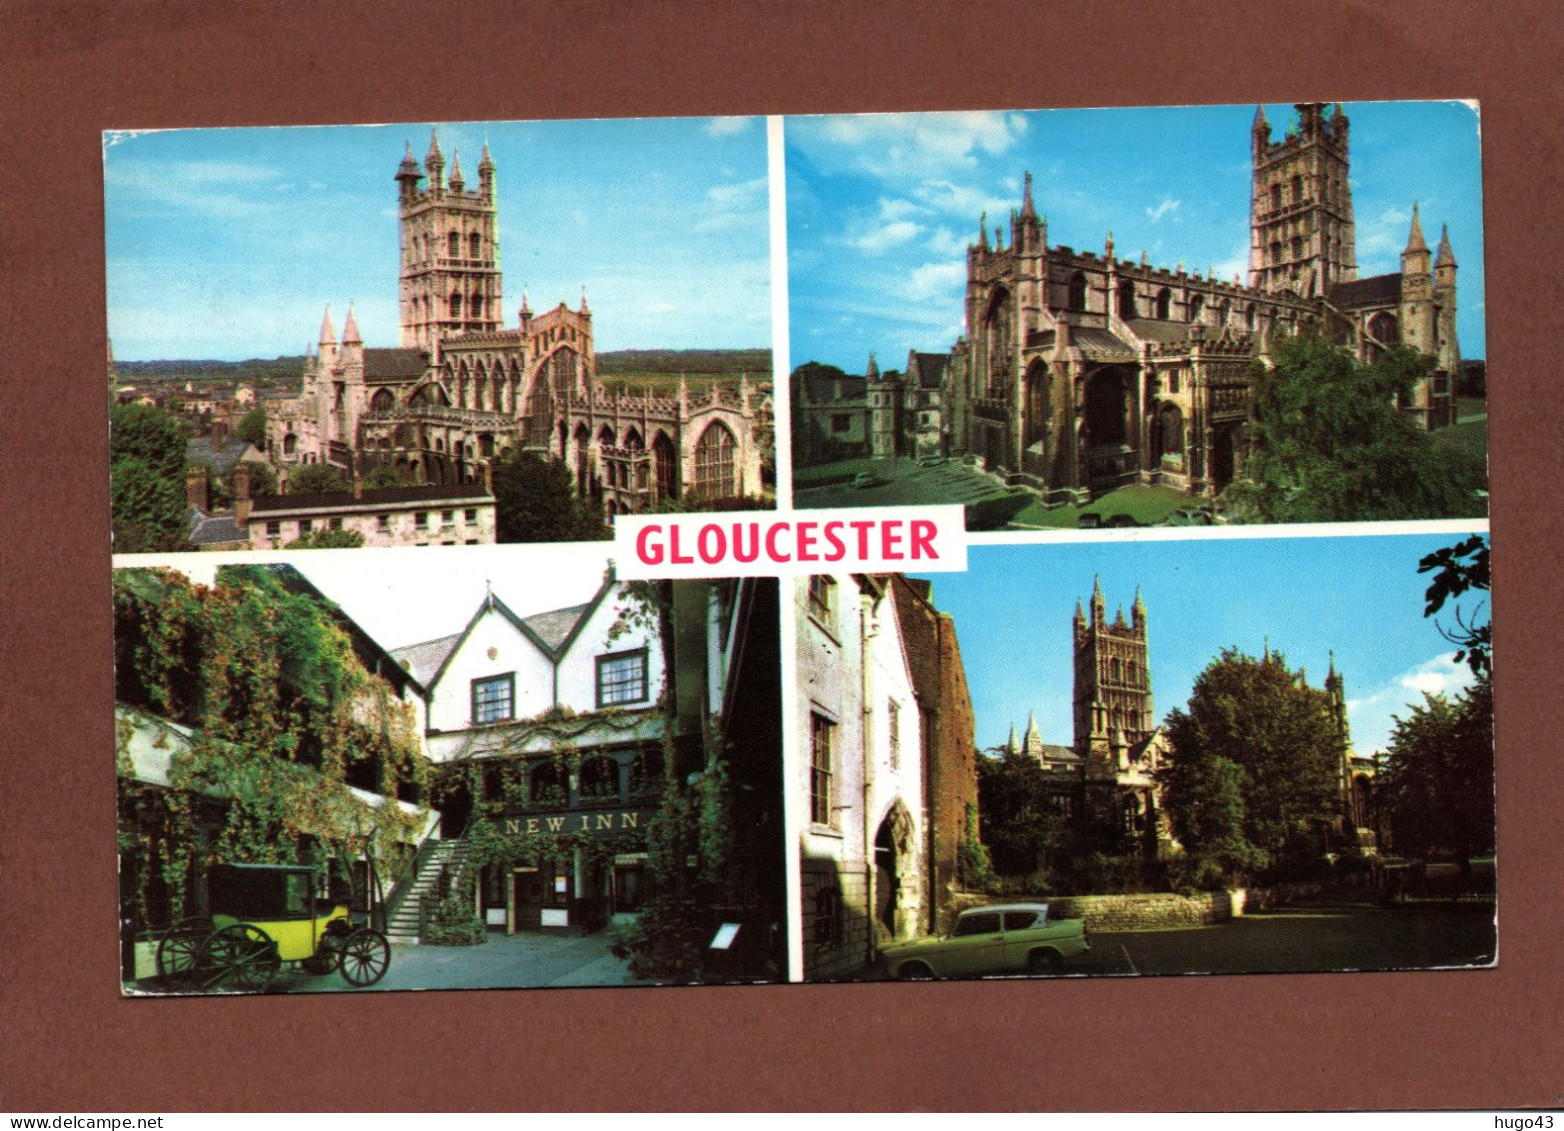 (RECTO / VERSO) GLOUCESTER IN 1970 - MULTIVUES -  THE CATHEDRAL AND THE NEW INNBEAU TIMBRE - FORMAT CPA - Gloucester